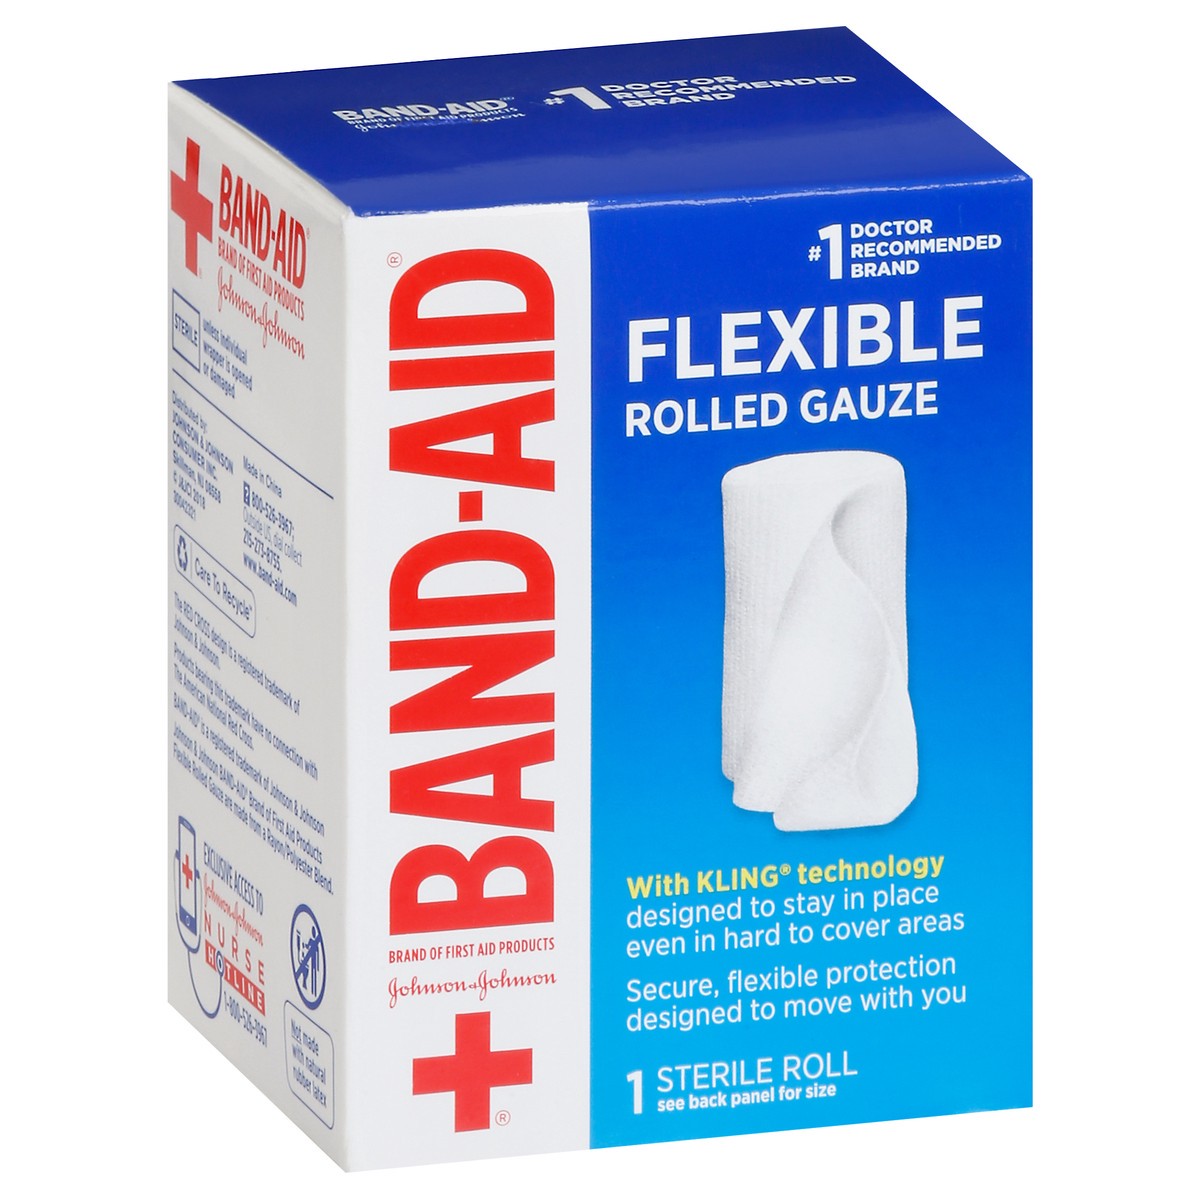 slide 9 of 9, BAND-AID Band Aid Brand of First Aid Flexible Rolled Gauze Dressing for Minor Wound Care, soft Padding and Instant Absorption, 2 Inches by 2.5 Yards, 1 ct